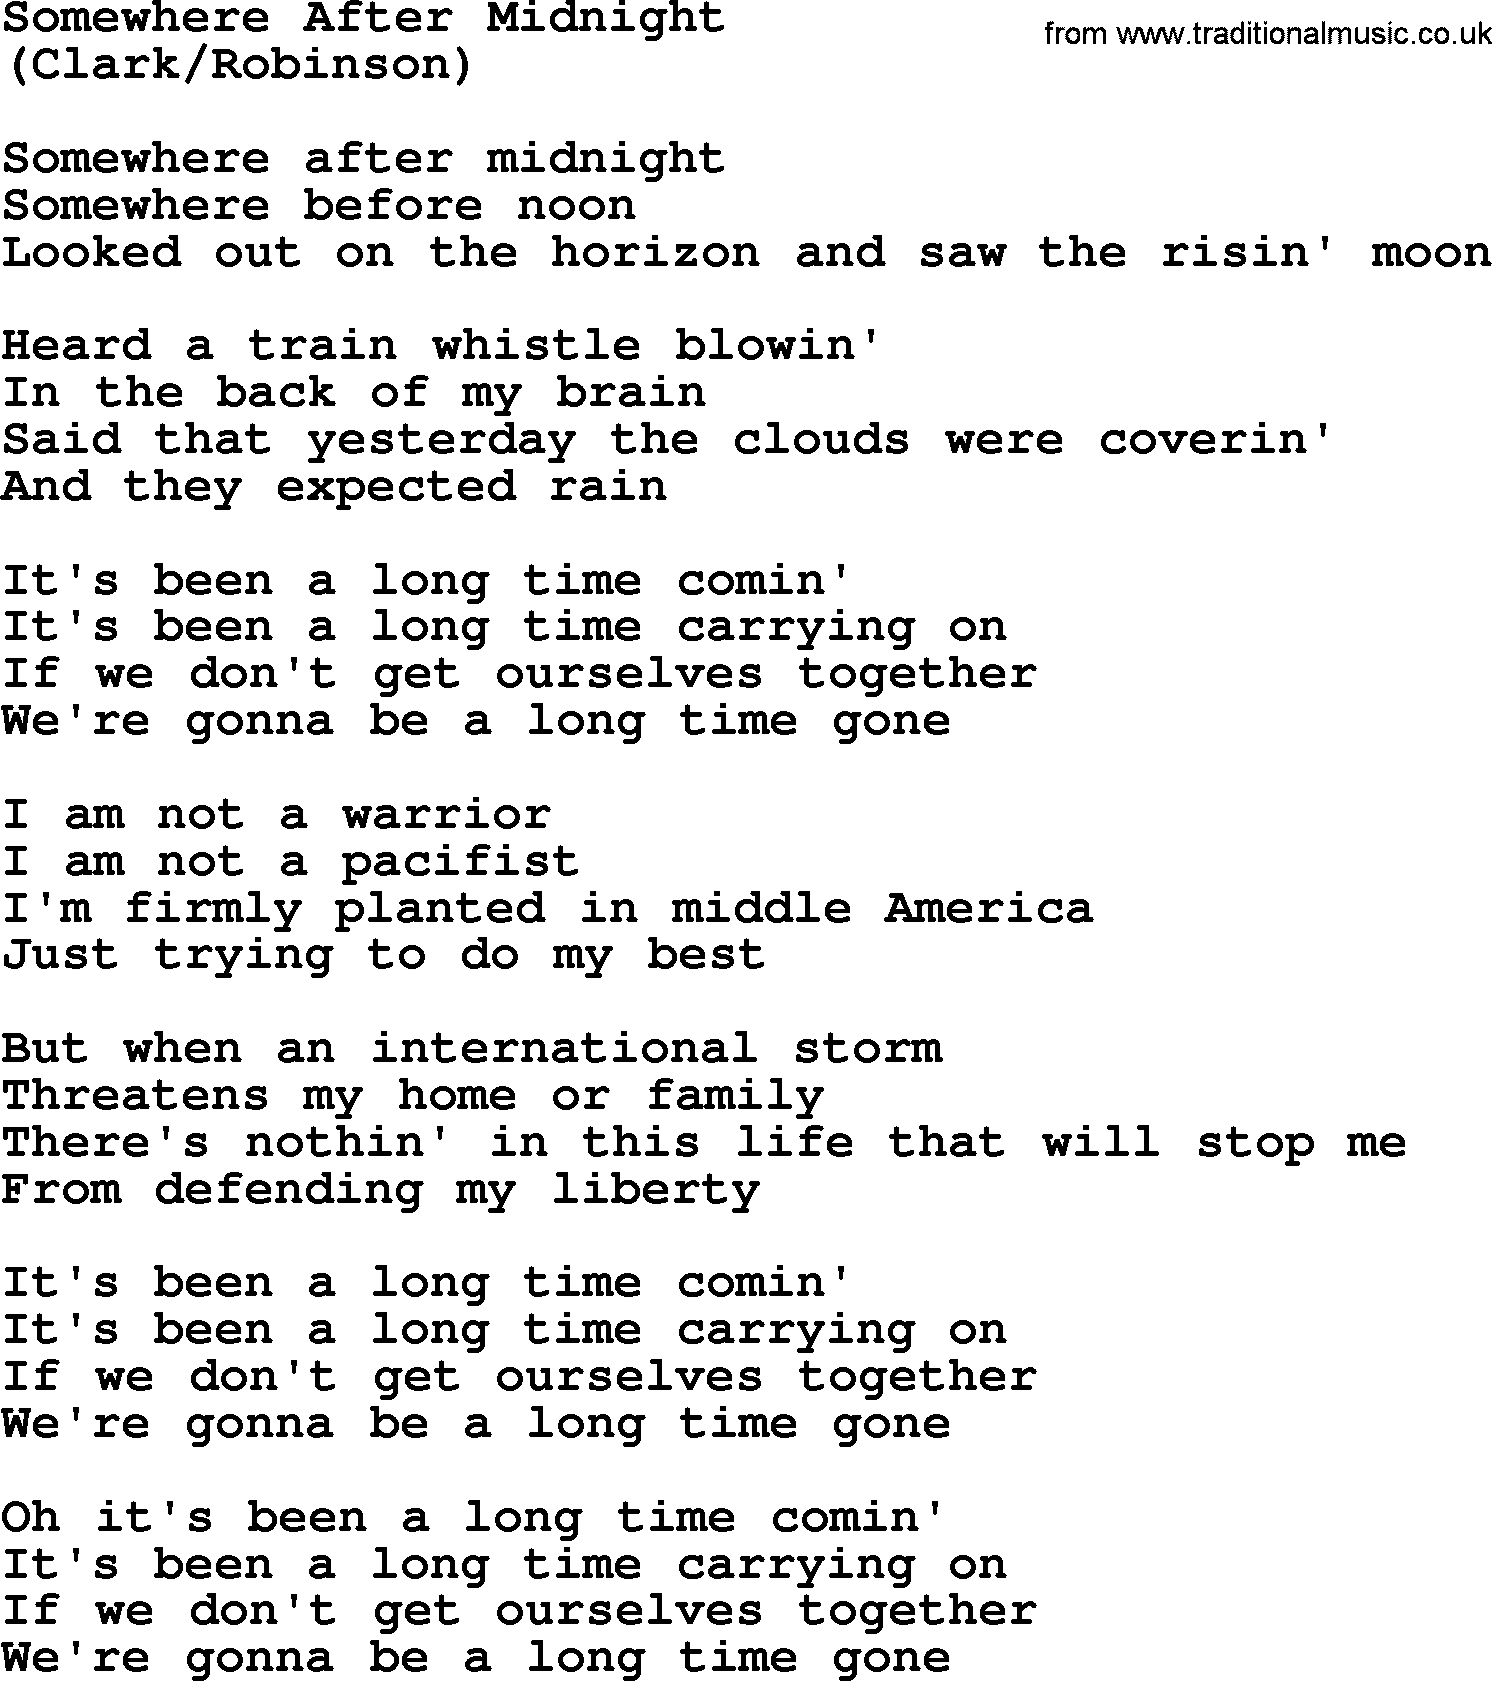 The Byrds song Somewhere After Midnight, lyrics